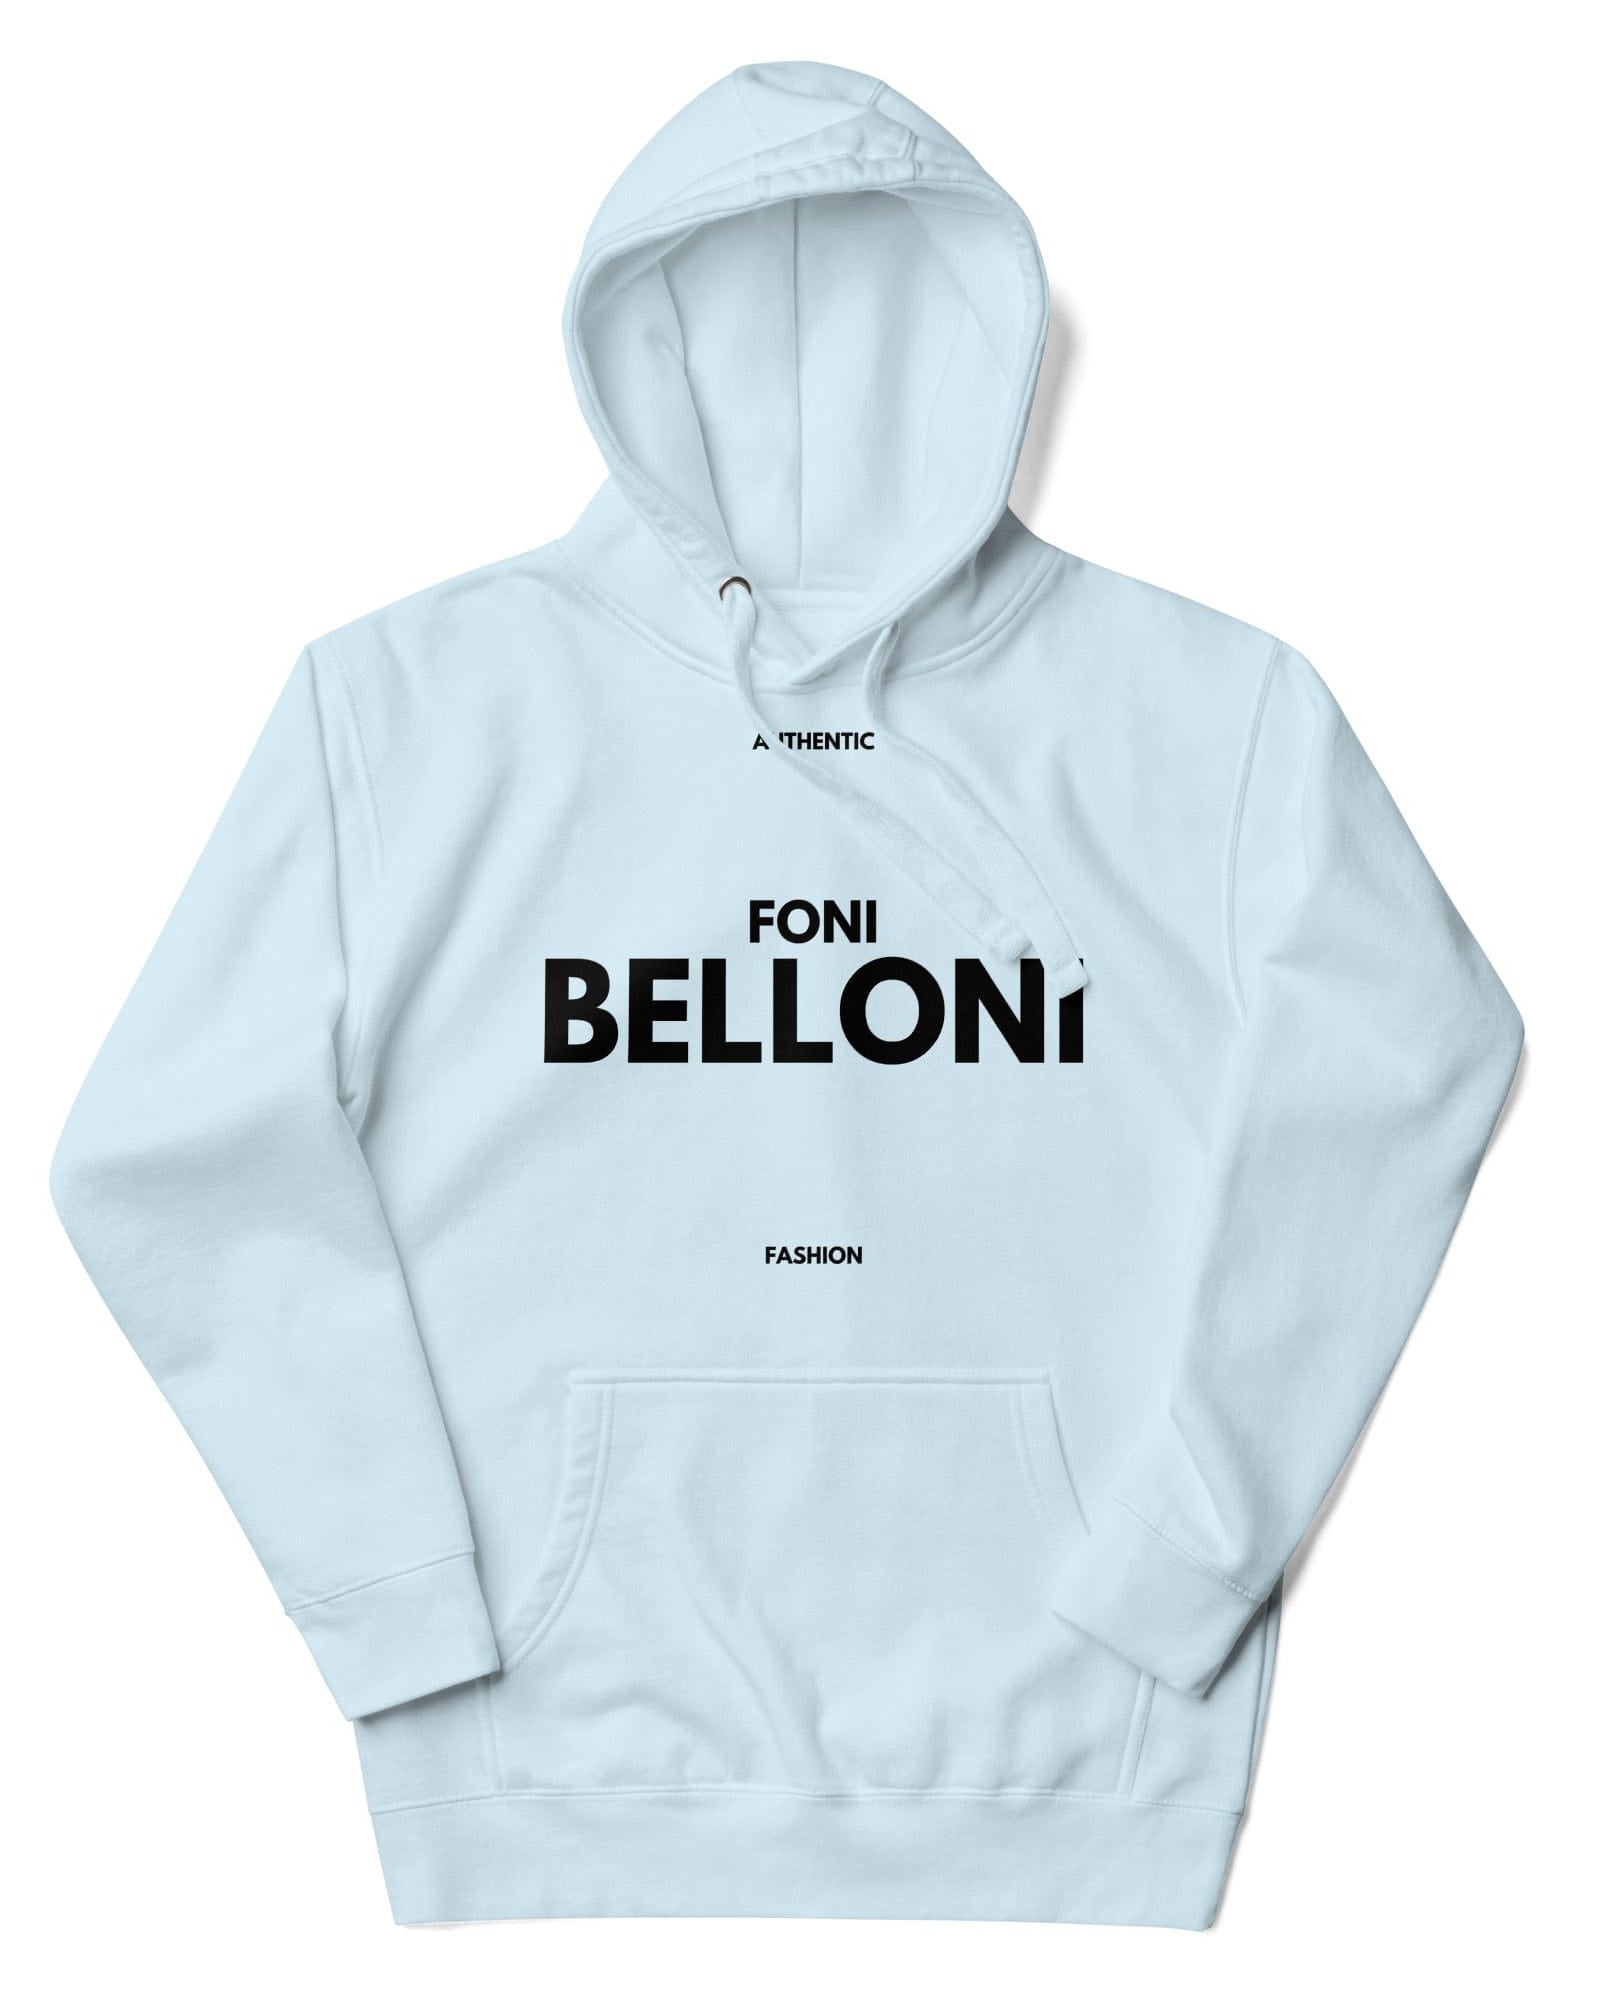 Foni Belloni Authentic Fashion Hoodie | Unisex Sky Blue / S Hoodies Jolly & Goode